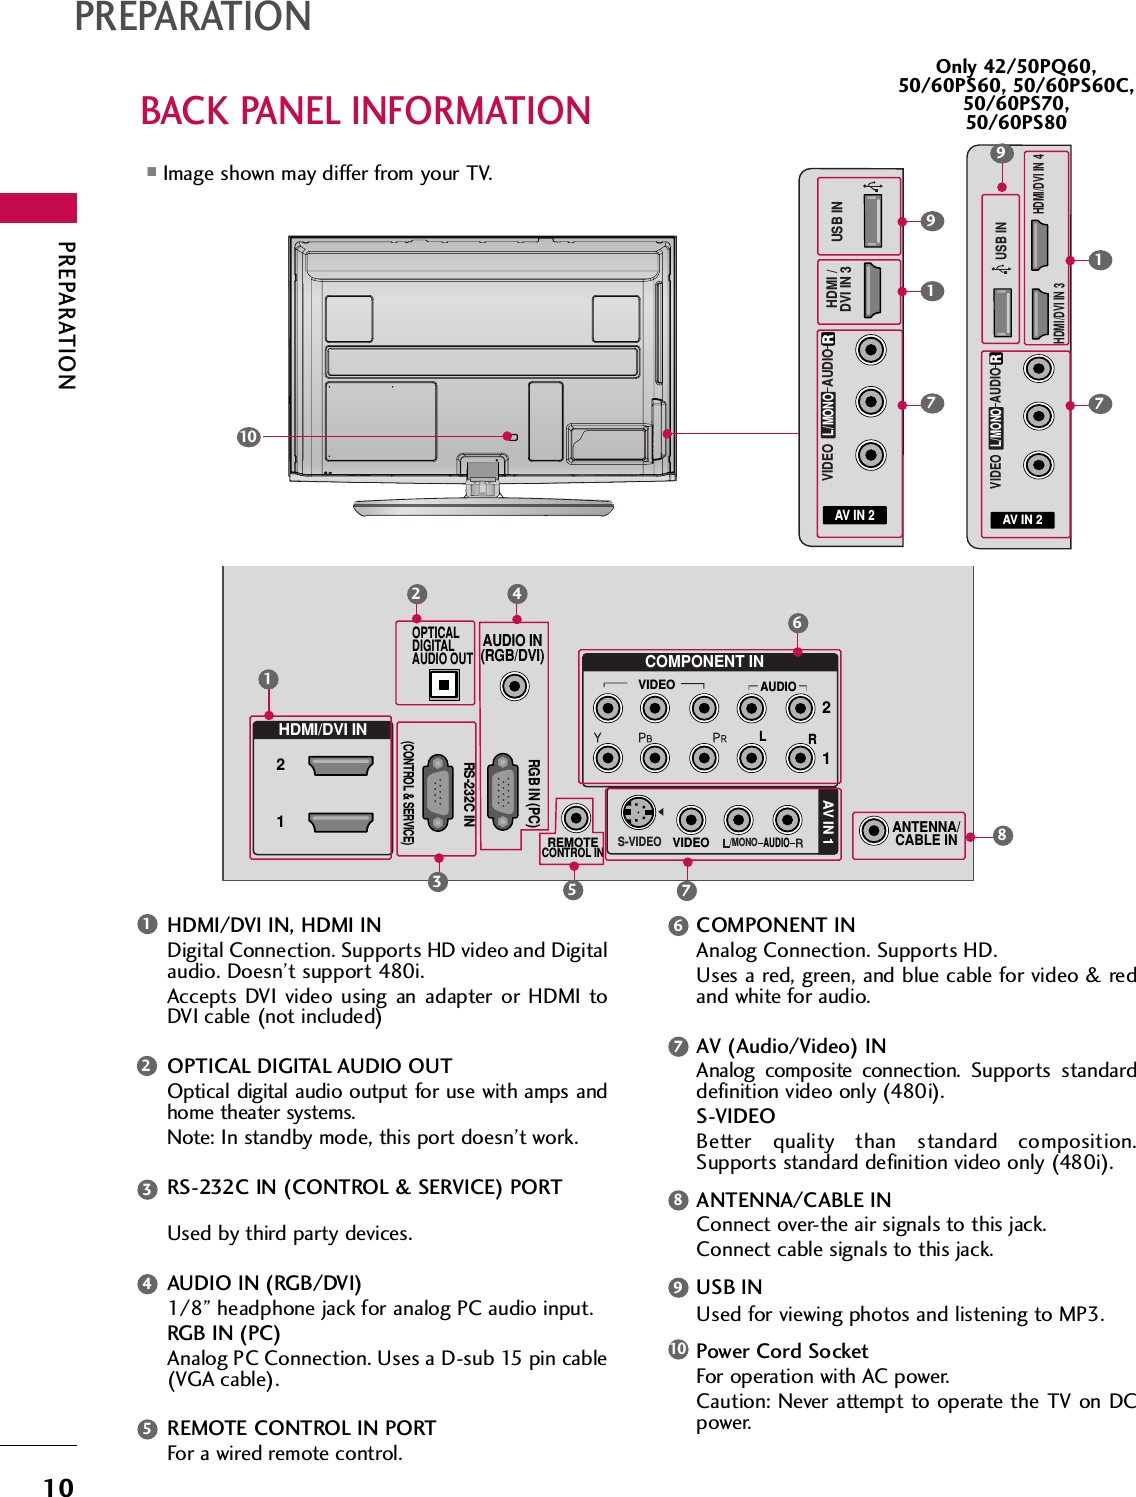 PREPARATION10PREPARATIONBACK PANEL INFORMATION■Image shown may differ from your TV.AV IN 2L/MONORAUDIOVIDEOUSB IN HDMI /DVI IN 3719RAV IN 2L/MONORAUDIOVIDEOUSB IN HDMI/DVI IN 3HDMI/DVI IN 4719Only 42/50PQ60,50/60PS60, 50/60PS60C,50/60PS70,50/60PS80RANTENNA/CABLE INHDMI/DVI IN 21RGB IN (PC)RS-232C IN(CONTROL &amp; SERVICE)OPTICALDIGITALAUDIO OUTAUDIO IN(RGB/DVI)COMPONENT IN12VIDEOAUDIOLRAUDIOAV IN 1VIDEOS-VIDEOREMOTECONTROL IN/MONO12HDMI/DVI IN, HDMI INDigital Connection. Supports HD video and Digitalaudio. Doesn’t support 480i. Accepts DVI video using an adapter or HDMI toDVI cable (not included)OPTICAL DIGITAL AUDIO OUTOptical digital audio output for use with amps andhome theater systems. Note: In standby mode, this port doesn’t work.RS-232C IN (CONTROL &amp; SERVICE) PORTUsed by third party devices.AUDIO IN (RGB/DVI)1/8” headphone jack for analog PC audio input.RGB IN (PC)Analog PC Connection. Uses a D-sub 15 pin cable(VGA cable).REMOTE CONTROL IN PORTFor a wired remote control.COMPONENT INAnalog Connection. Supports HD. Uses a red, green, and blue cable for video &amp; redand white for audio.AV (Audio/Video) INAnalog composite connection. Supports standarddefinition video only (480i).S-VIDEOBetter quality than standard composition.Supports standard definition video only (480i).ANTENNA/CABLE INConnect over-the air signals to this jack.Connect cable signals to this jack.USB INUsed for viewing photos and listening to MP3.Power Cord SocketFor operation with AC power. Caution: Never attempt to operate the TV on DCpower.1234591086734567810